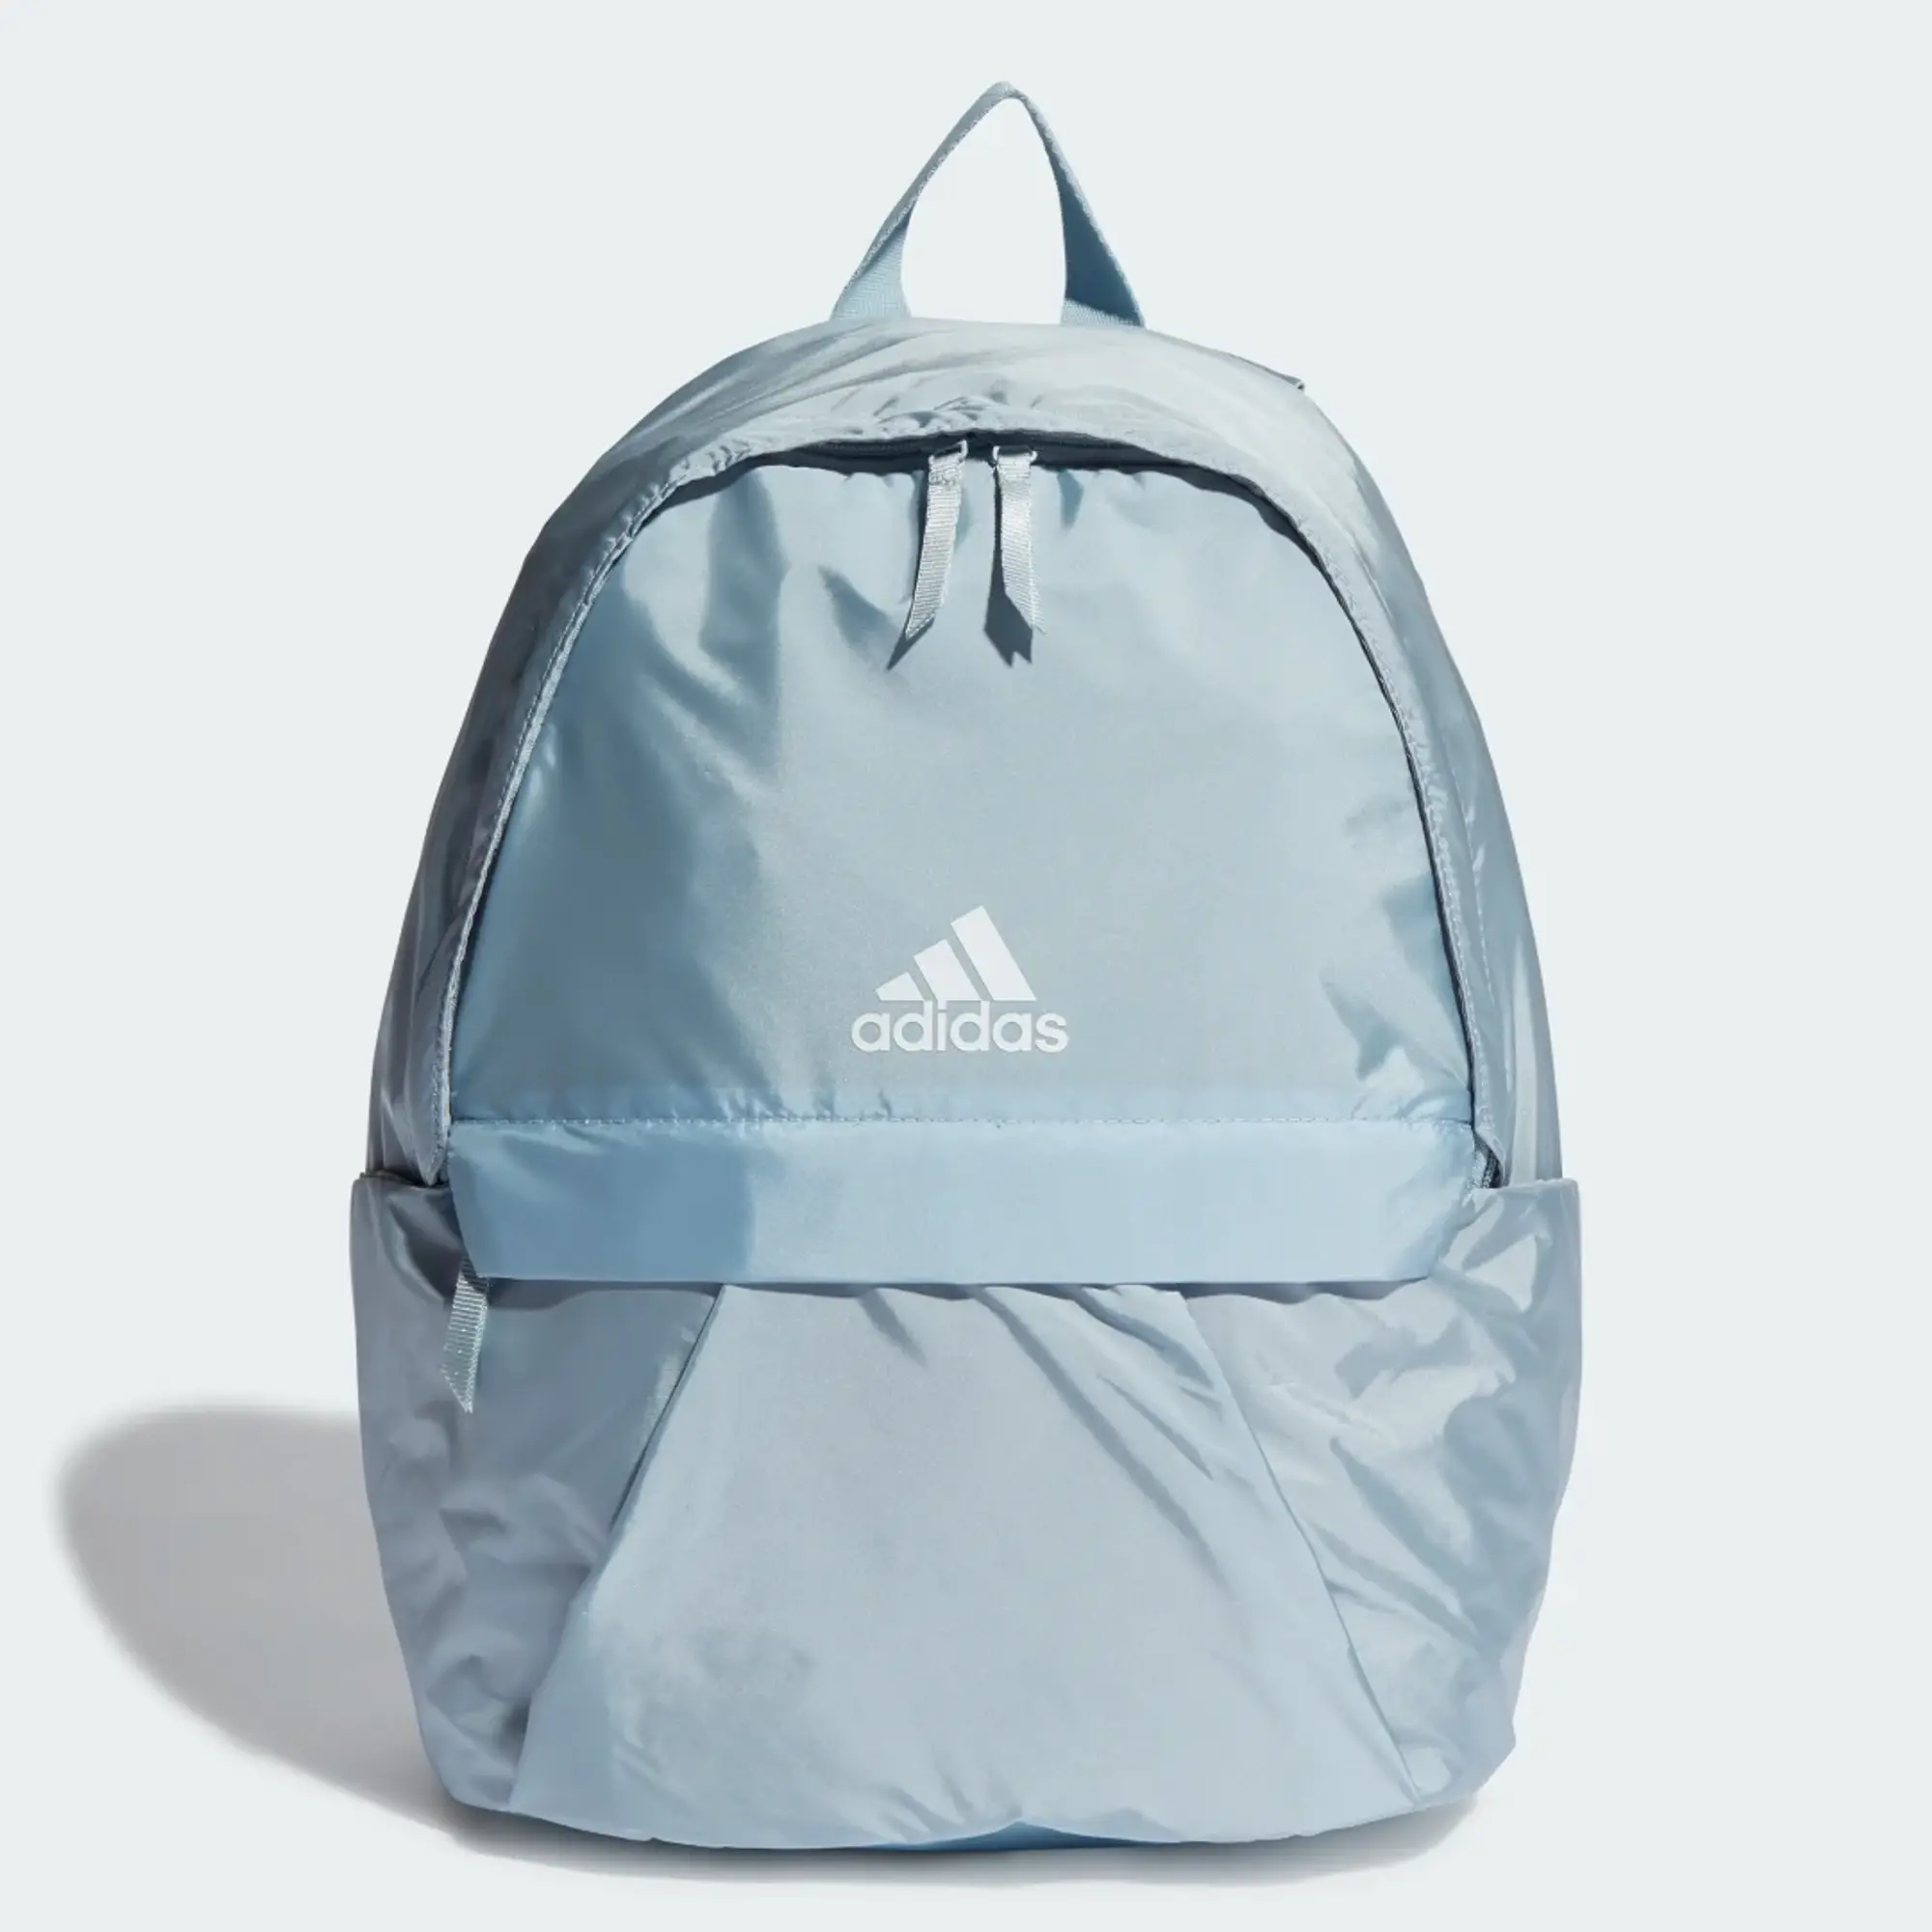 Adidas Classic Gen Z Backpack -